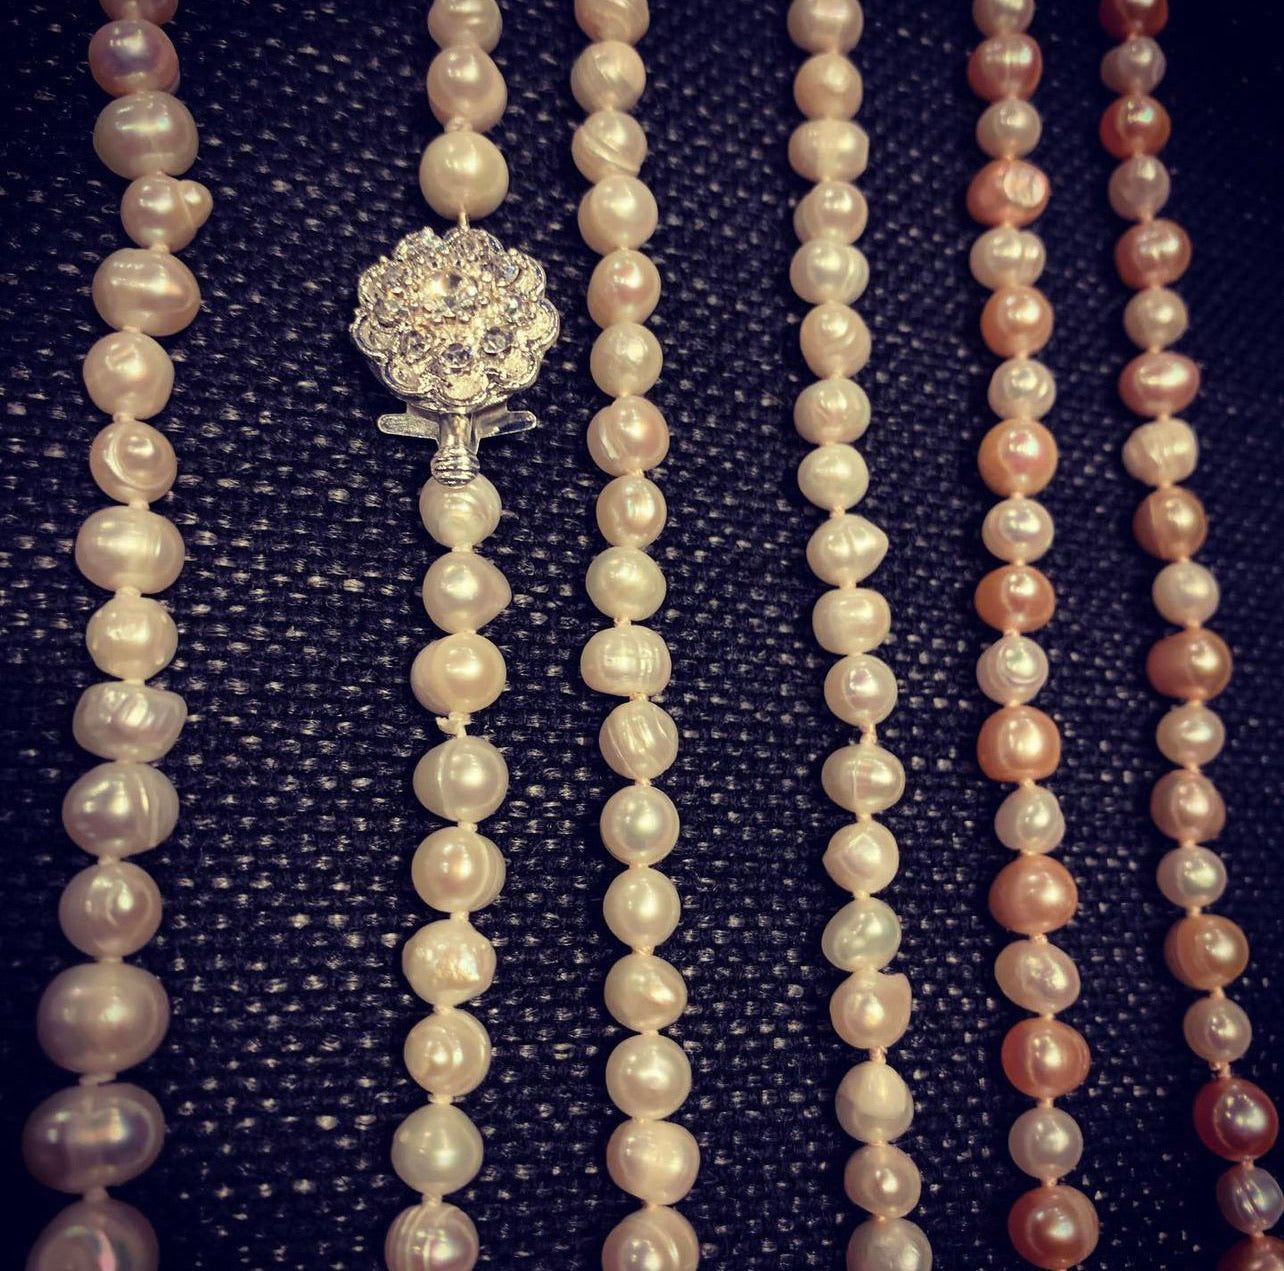 String your own pearl necklace Workshop Lunch & Fizz... 18th Mar. 23